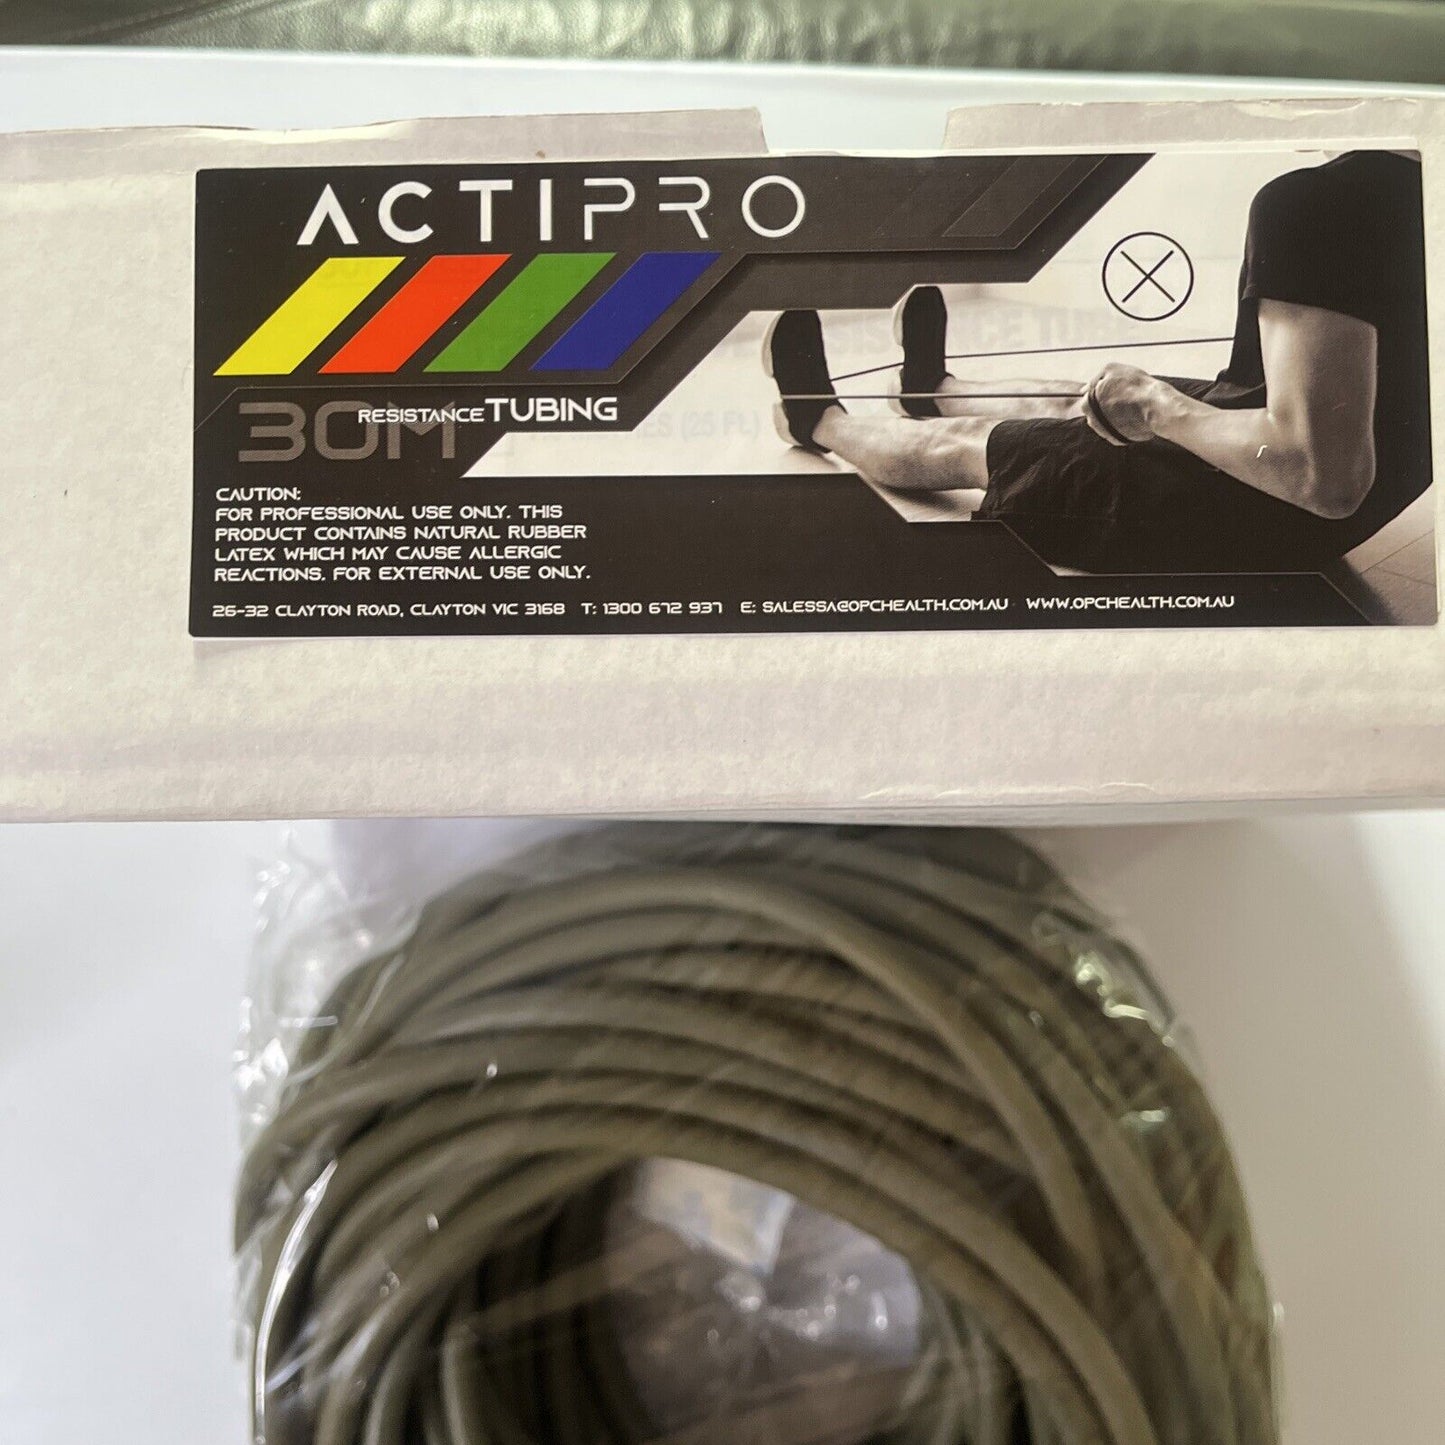 Actipro Resistance Tubing 1m 5m 25m Training Exercise Tube - Light-Super Strong